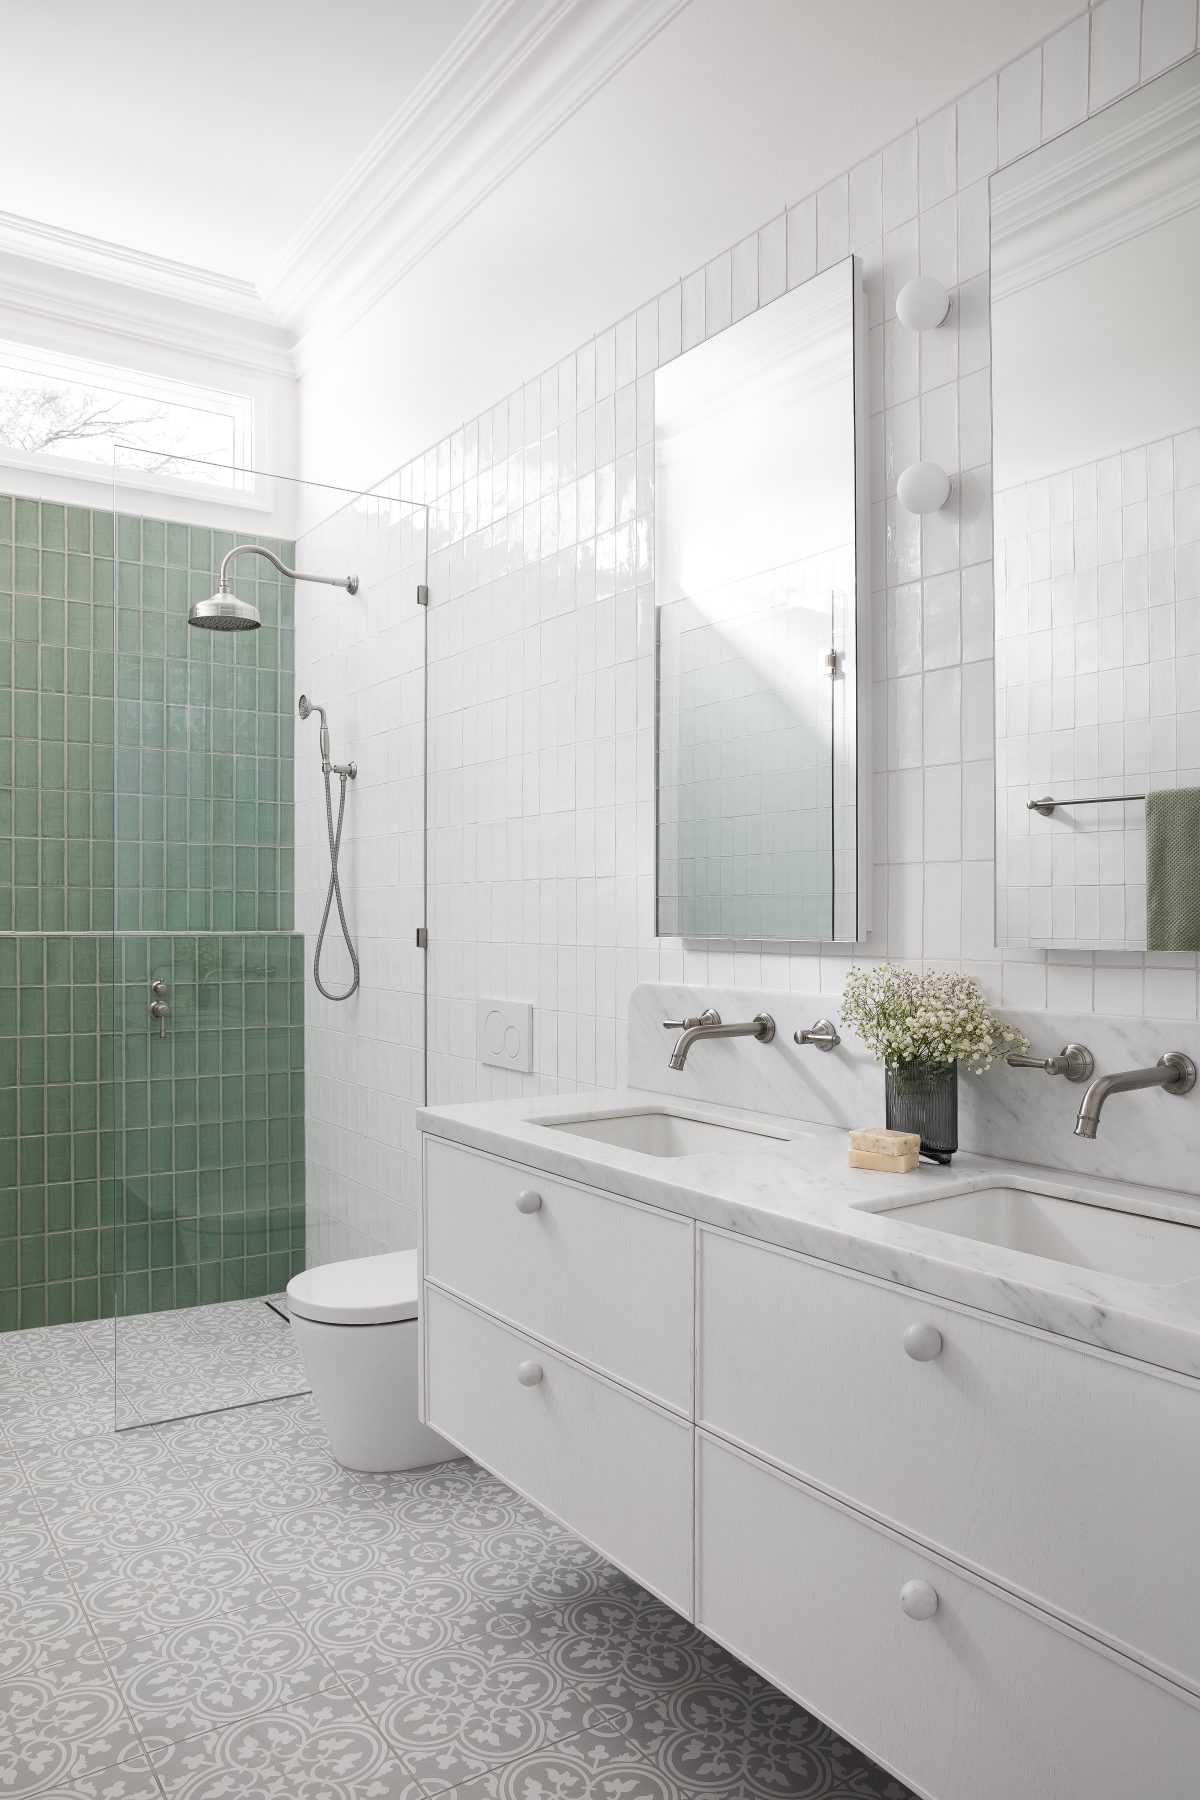 A custom designed bathroom featuring Spanish Handmade White Gloss tiles in White and Sage. Designed and built by MJ Harris Group.